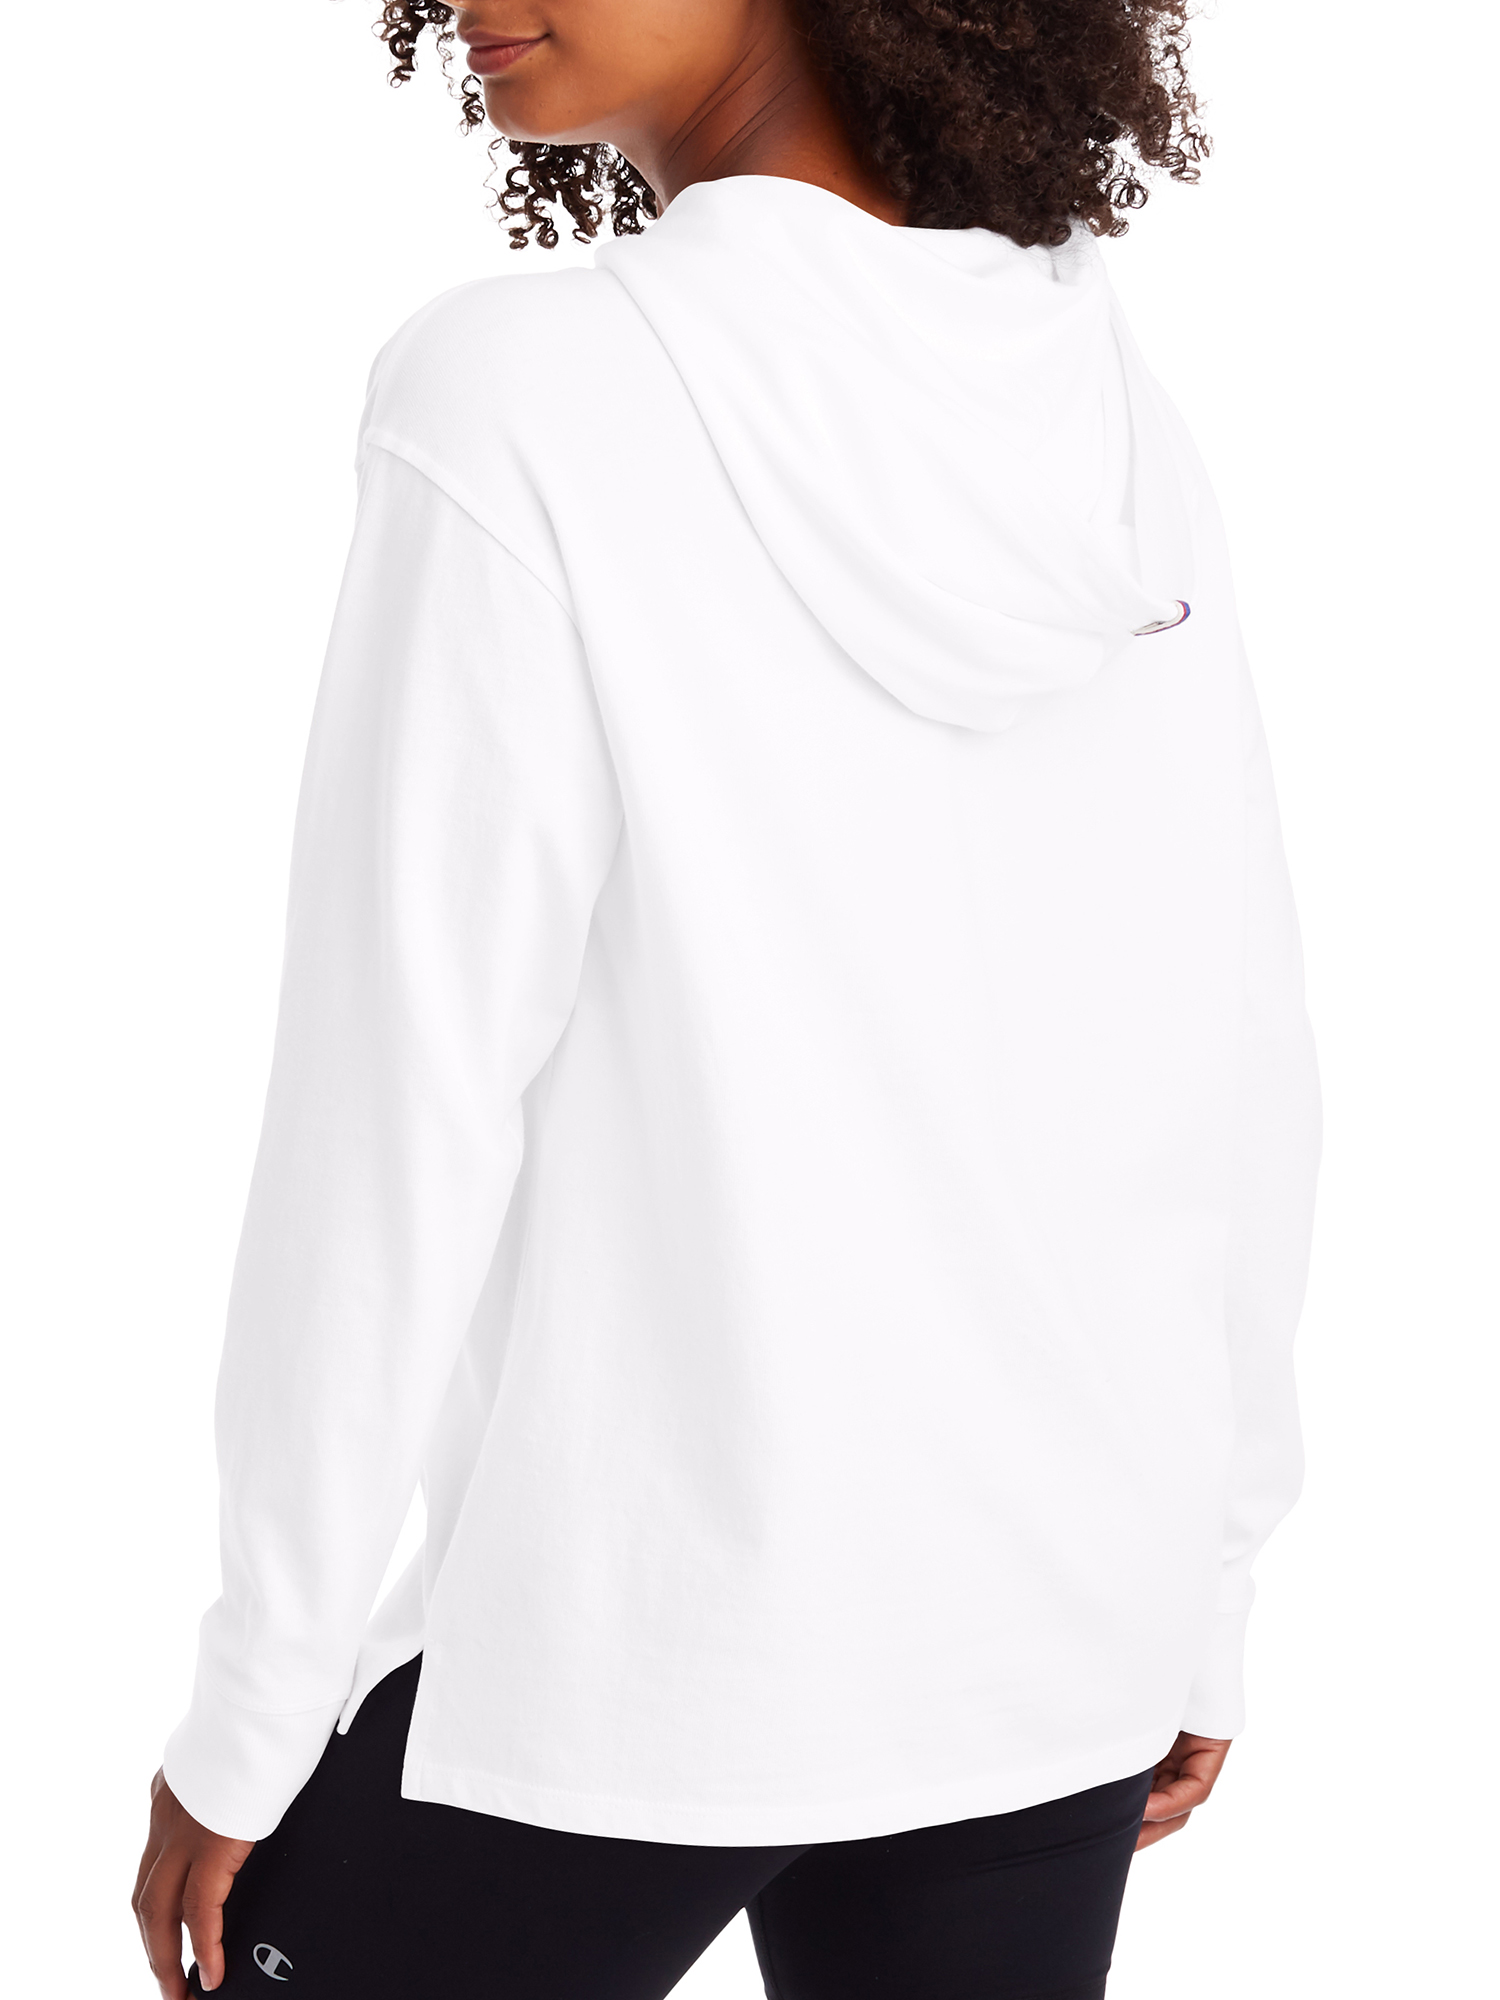 Champion Women's Middleweight Jersey Pullover Hoodie - image 4 of 5